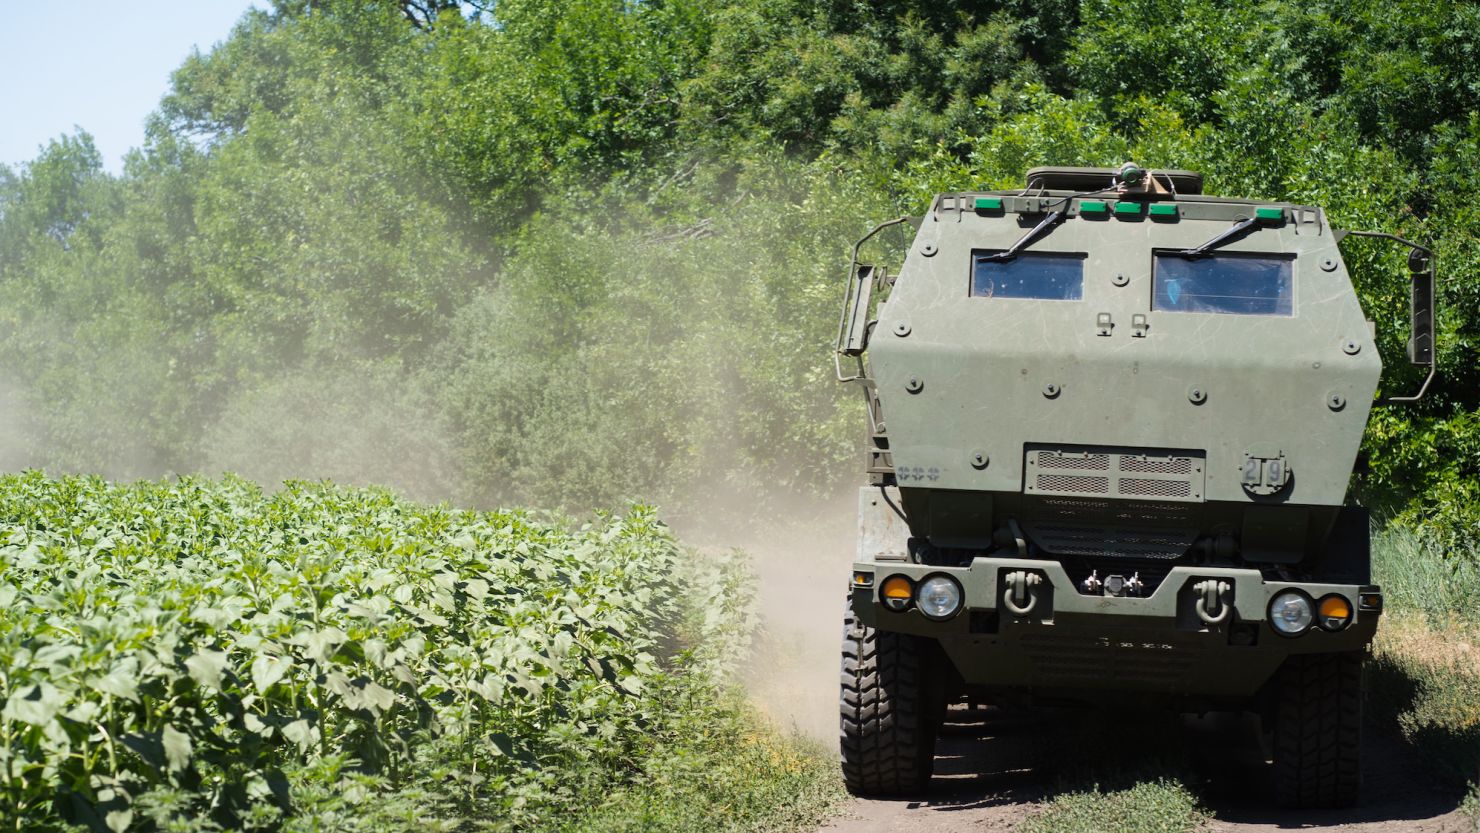 HIMARS vehicle as seen driving on the road in Eastern Ukraine on July 1, 2022.